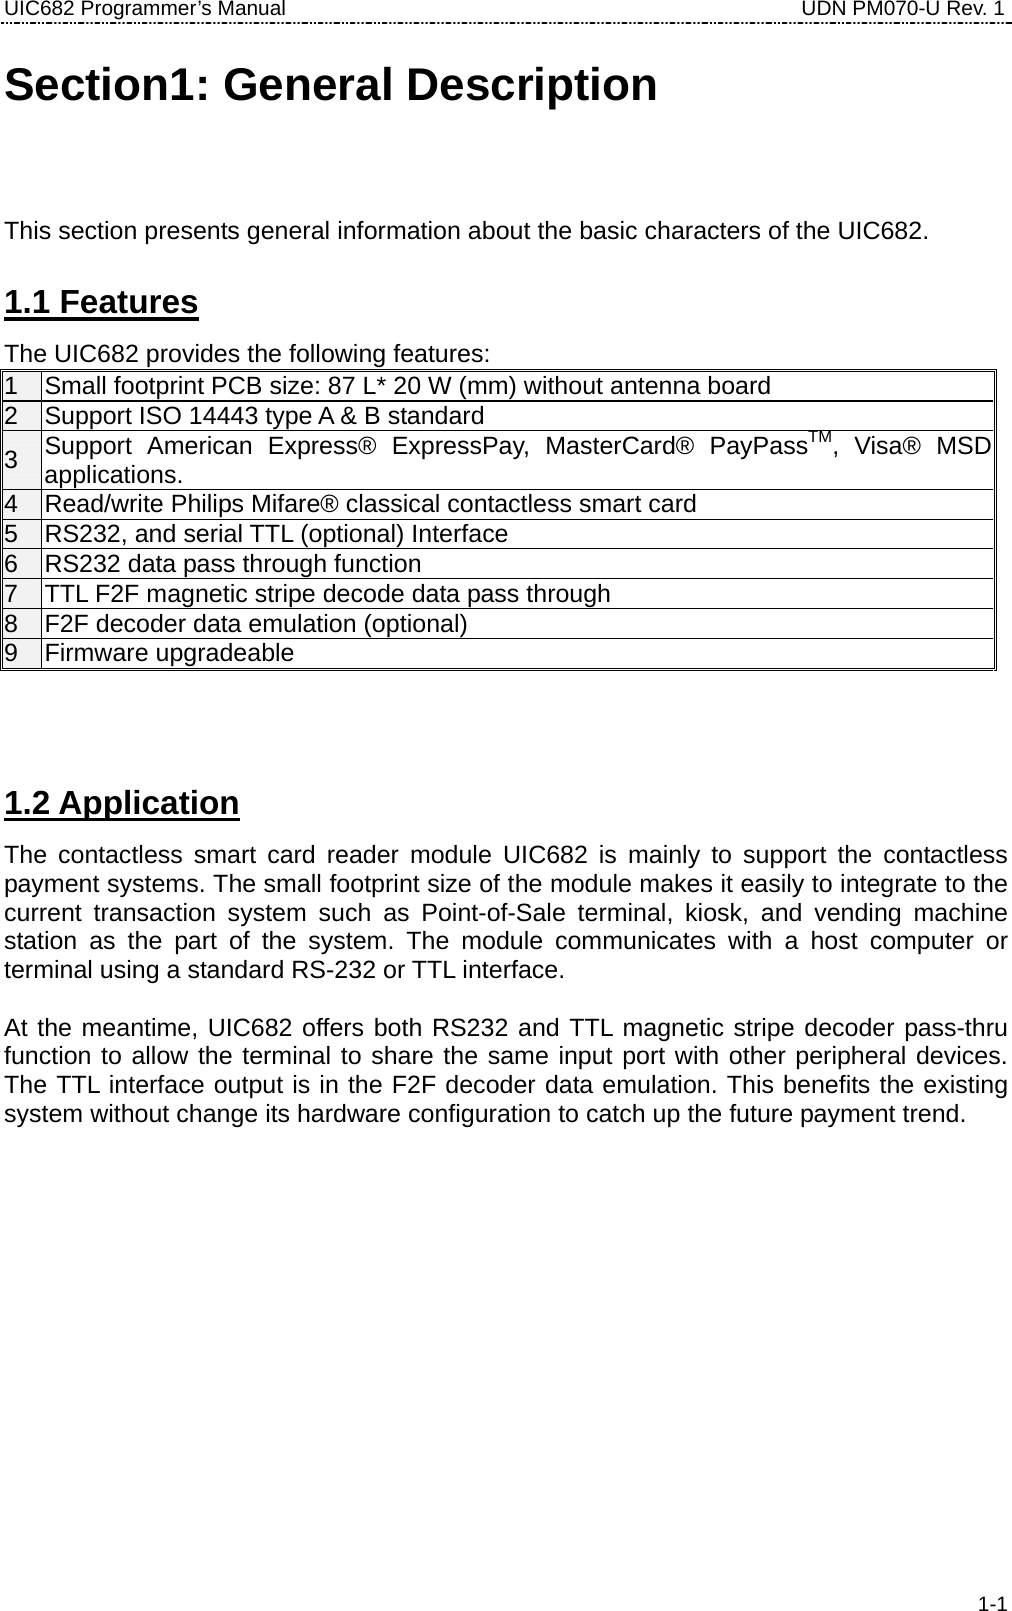 UIC682 Programmer’s Manual                                     UDN PM070-U Rev. 1 Section1: General Description This section presents general information about the basic characters of the UIC682. 1.1 Features The UIC682 provides the following features: 1  Small footprint PCB size: 87 L* 20 W (mm) without antenna board 2  Support ISO 14443 type A &amp; B standard 3  Support American Express® ExpressPay, MasterCard® PayPassTM, Visa® MSD applications. 4  Read/write Philips Mifare® classical contactless smart card 5  RS232, and serial TTL (optional) Interface 6  RS232 data pass through function 7  TTL F2F magnetic stripe decode data pass through 8  F2F decoder data emulation (optional) 9 Firmware upgradeable   1.2 Application The contactless smart card reader module UIC682 is mainly to support the contactless payment systems. The small footprint size of the module makes it easily to integrate to the current transaction system such as Point-of-Sale terminal, kiosk, and vending machine station as the part of the system. The module communicates with a host computer or terminal using a standard RS-232 or TTL interface.  At the meantime, UIC682 offers both RS232 and TTL magnetic stripe decoder pass-thru function to allow the terminal to share the same input port with other peripheral devices. The TTL interface output is in the F2F decoder data emulation. This benefits the existing system without change its hardware configuration to catch up the future payment trend.    1-1